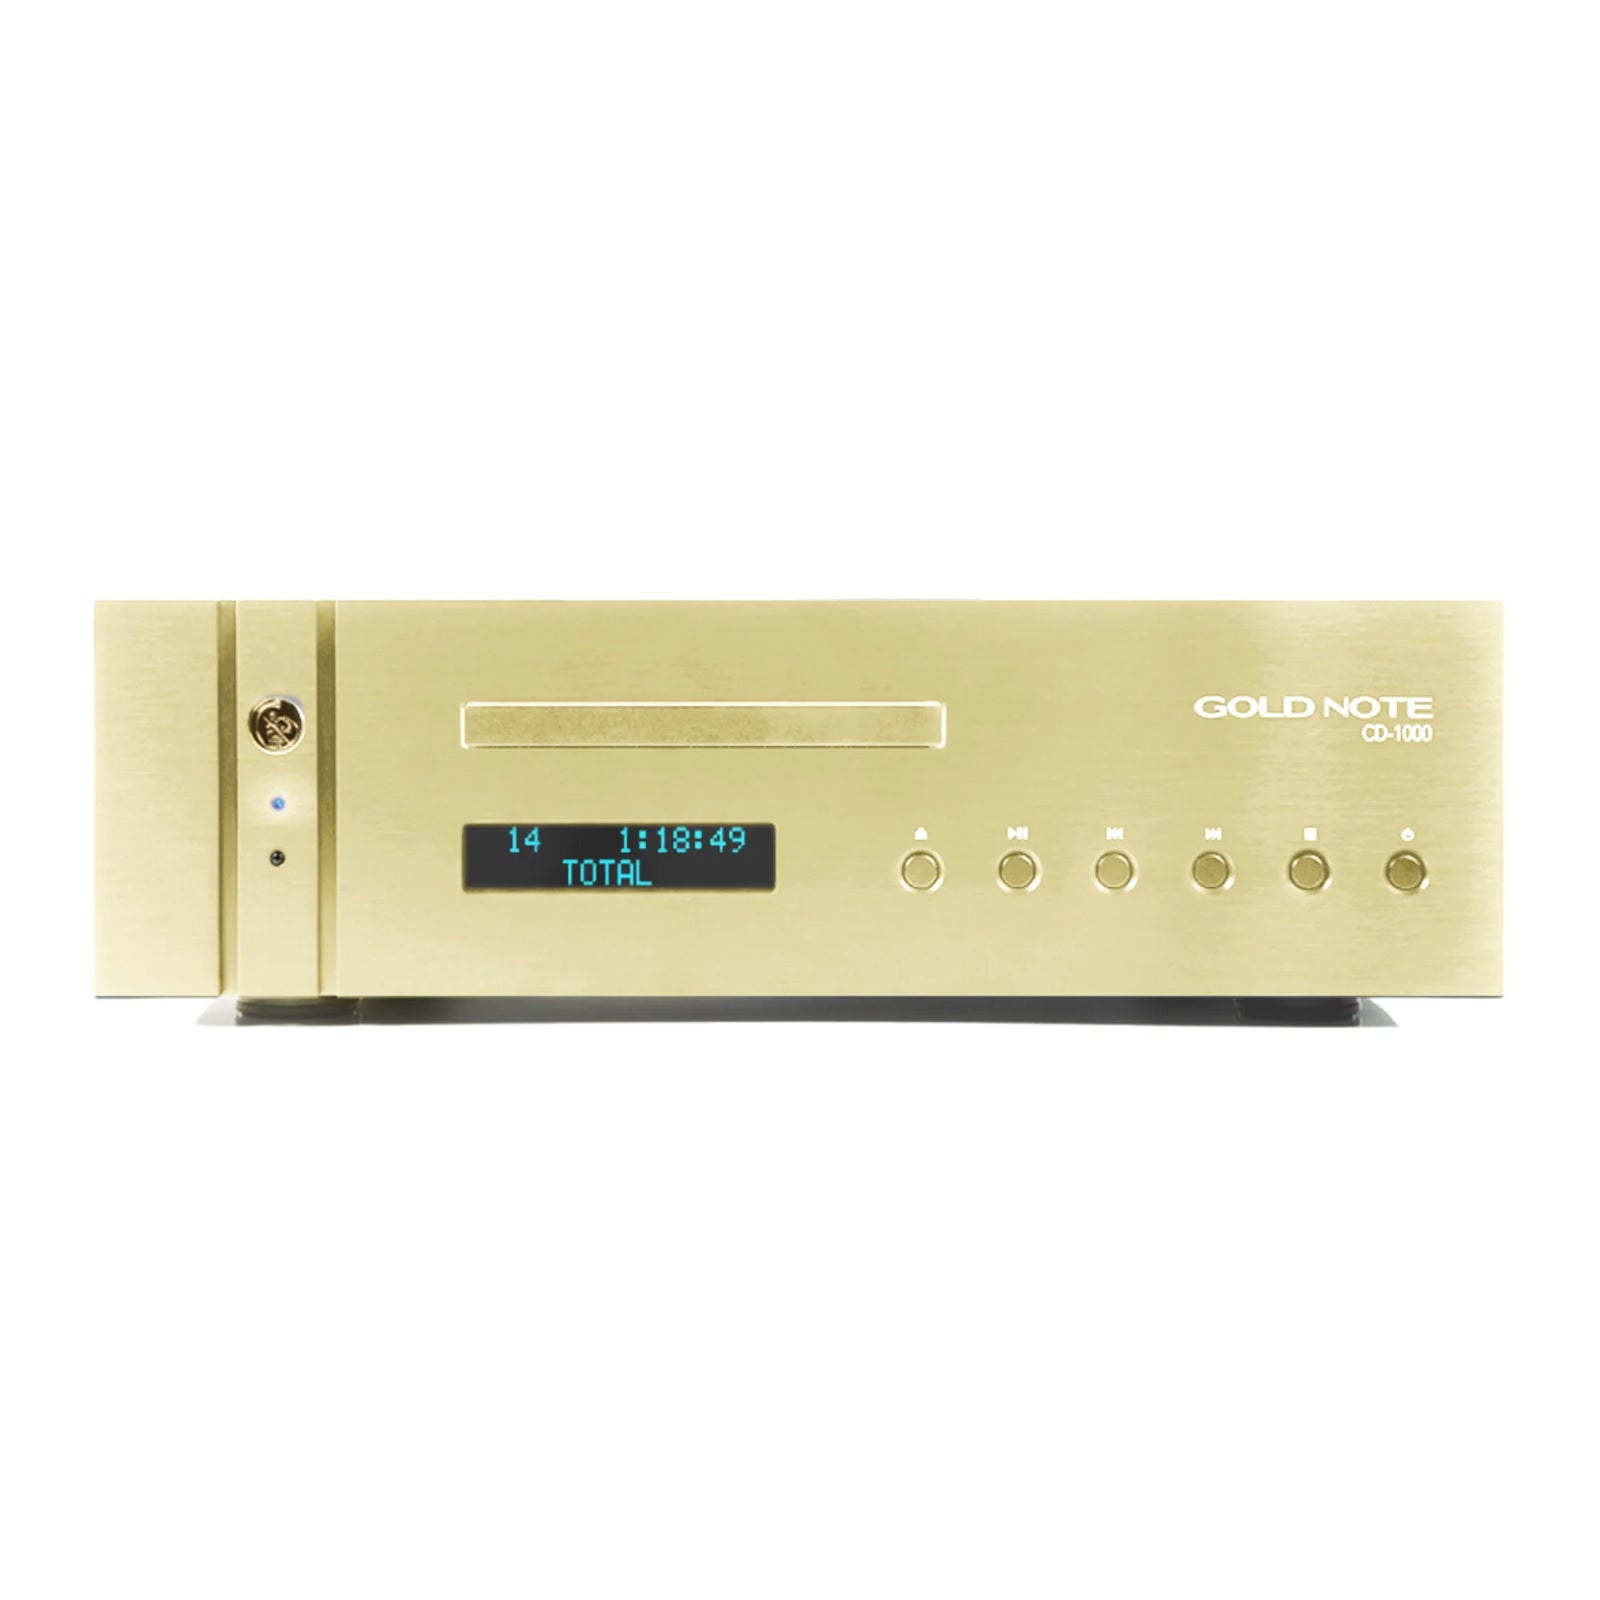 GOLD NOTE CD-1000 MKII